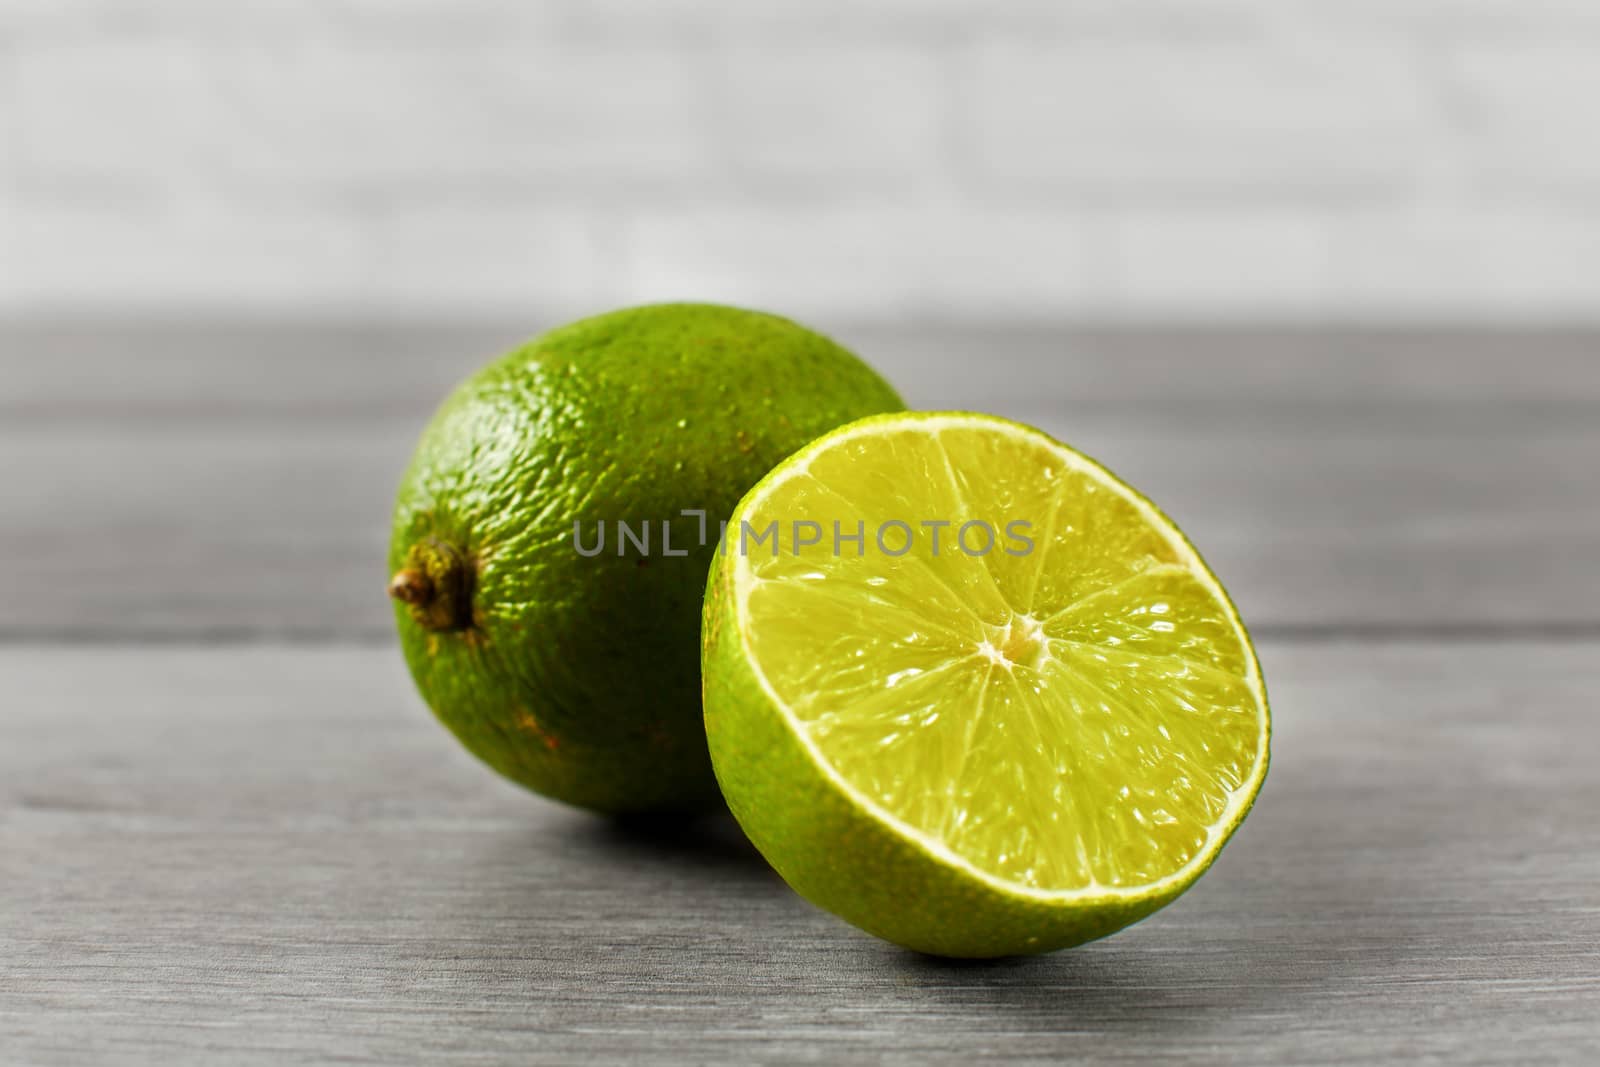 Whole lime and other one cut in half, on a gray wooden table.